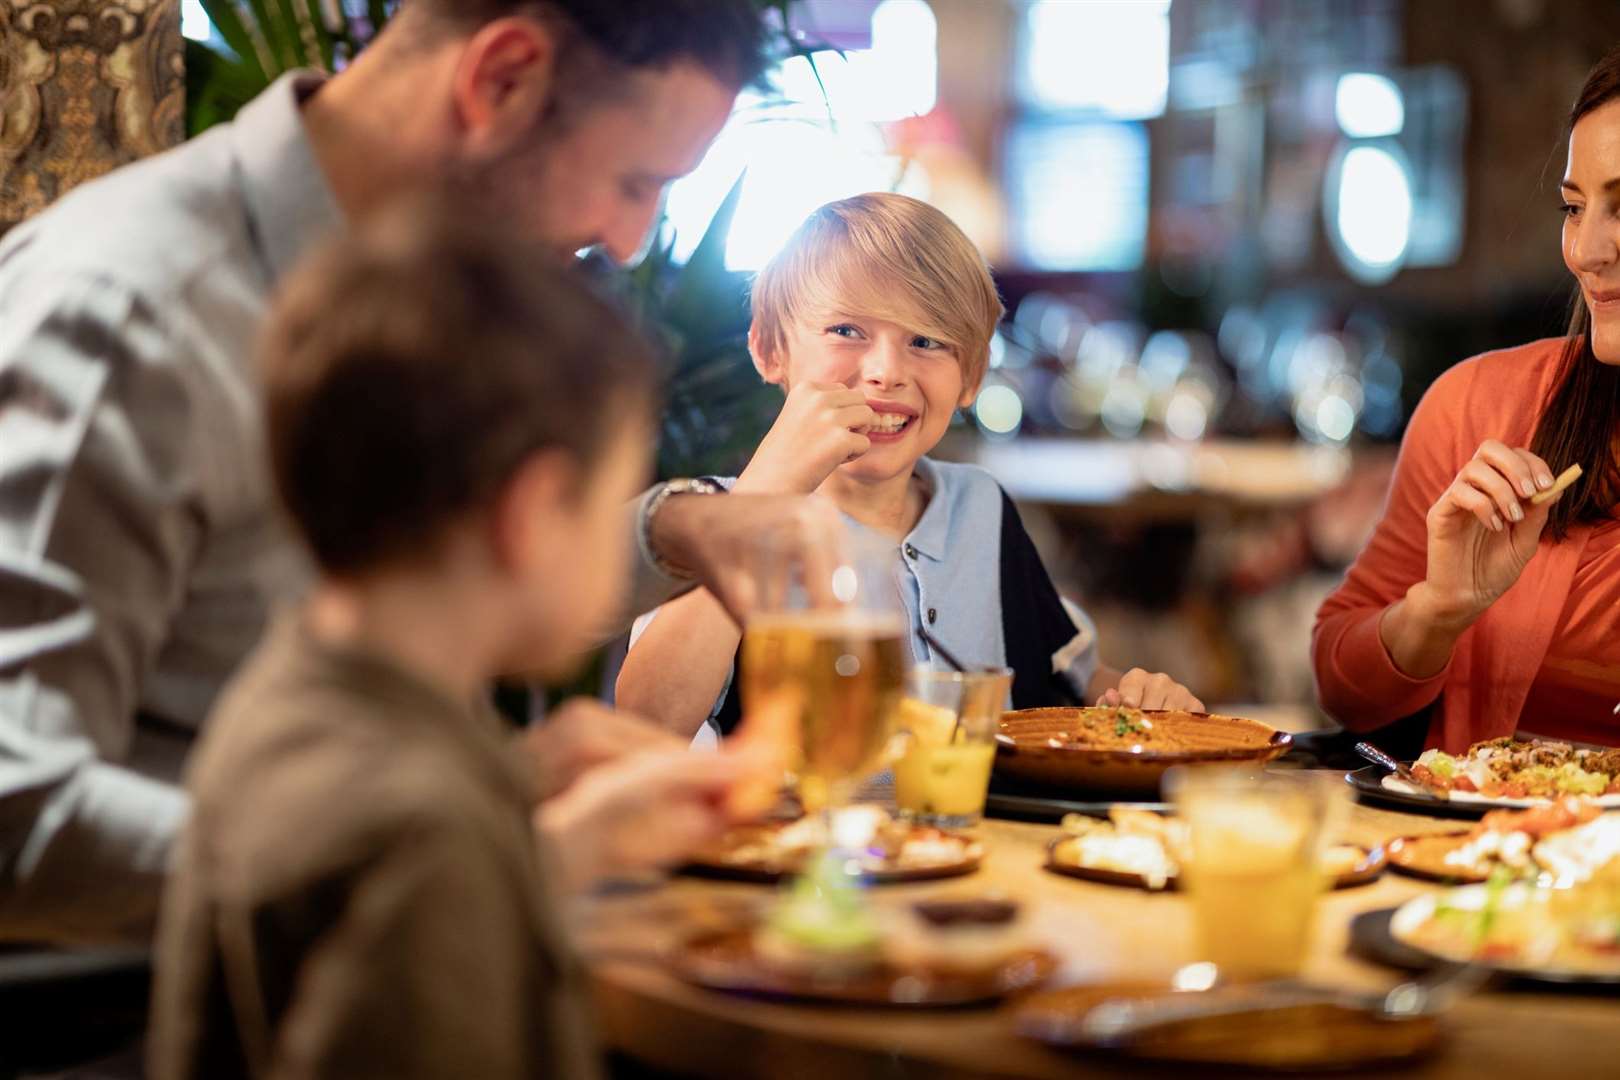 The report says more than a third of restaurant meals aimed at children exceed salt targets set for the end of the year. Photo: iStock/DGLimages.